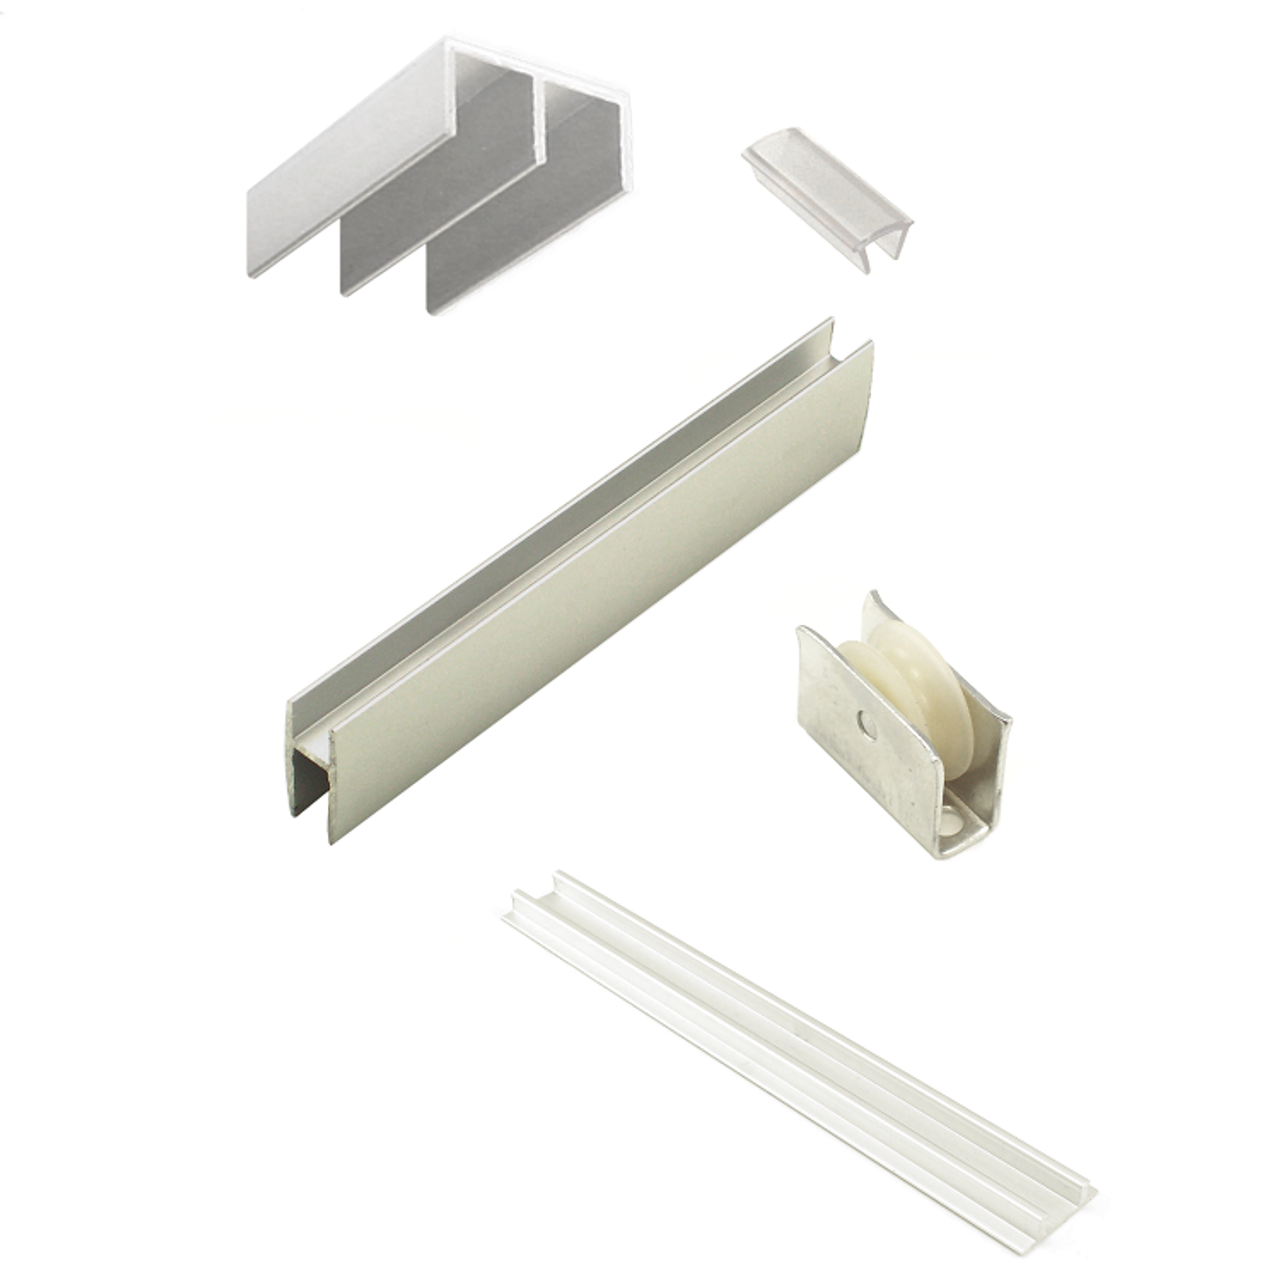 EPCO Assembly NO. 14 Sliding Door Track Kit for 1/4" Glass  Doors